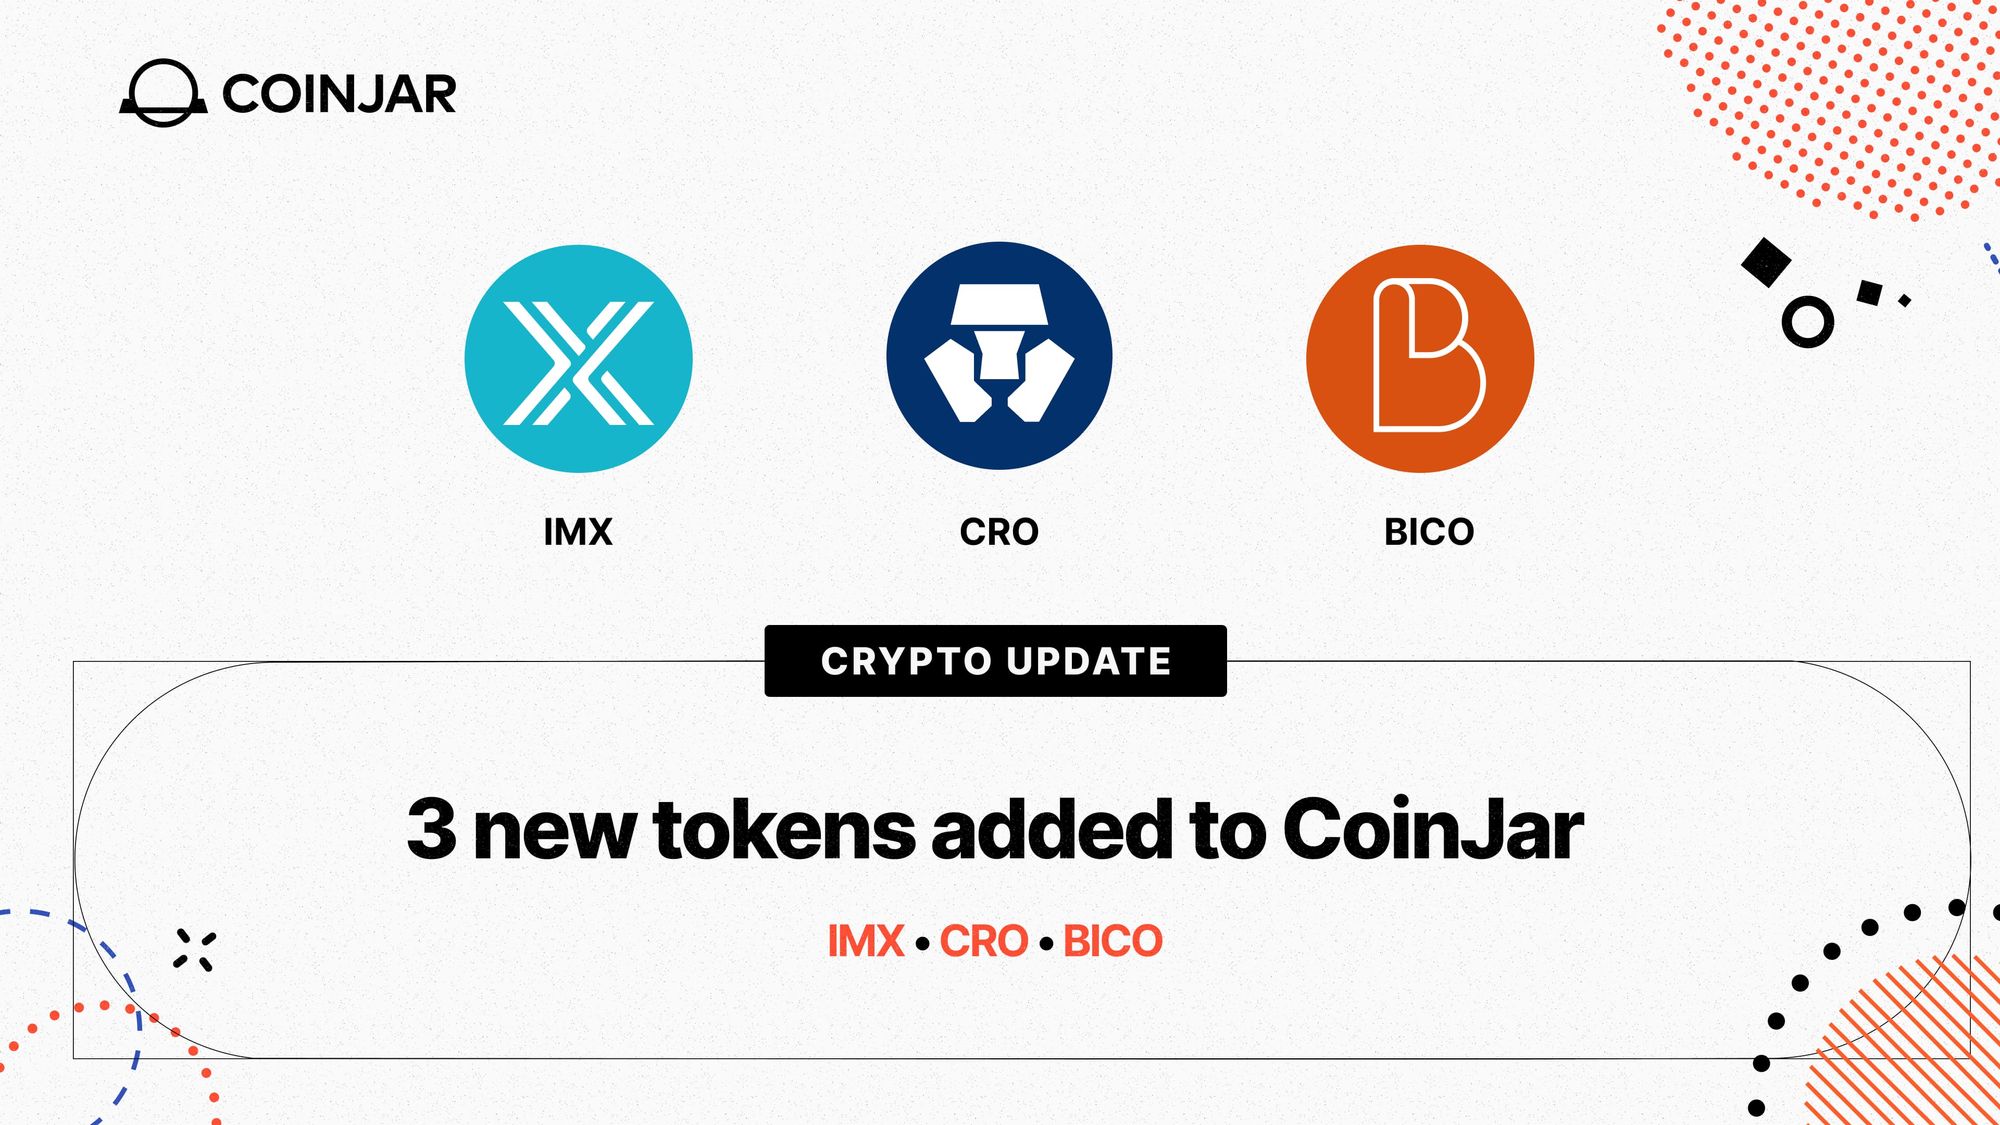 New token alert: CRO, IMX and BICO added to CoinJar